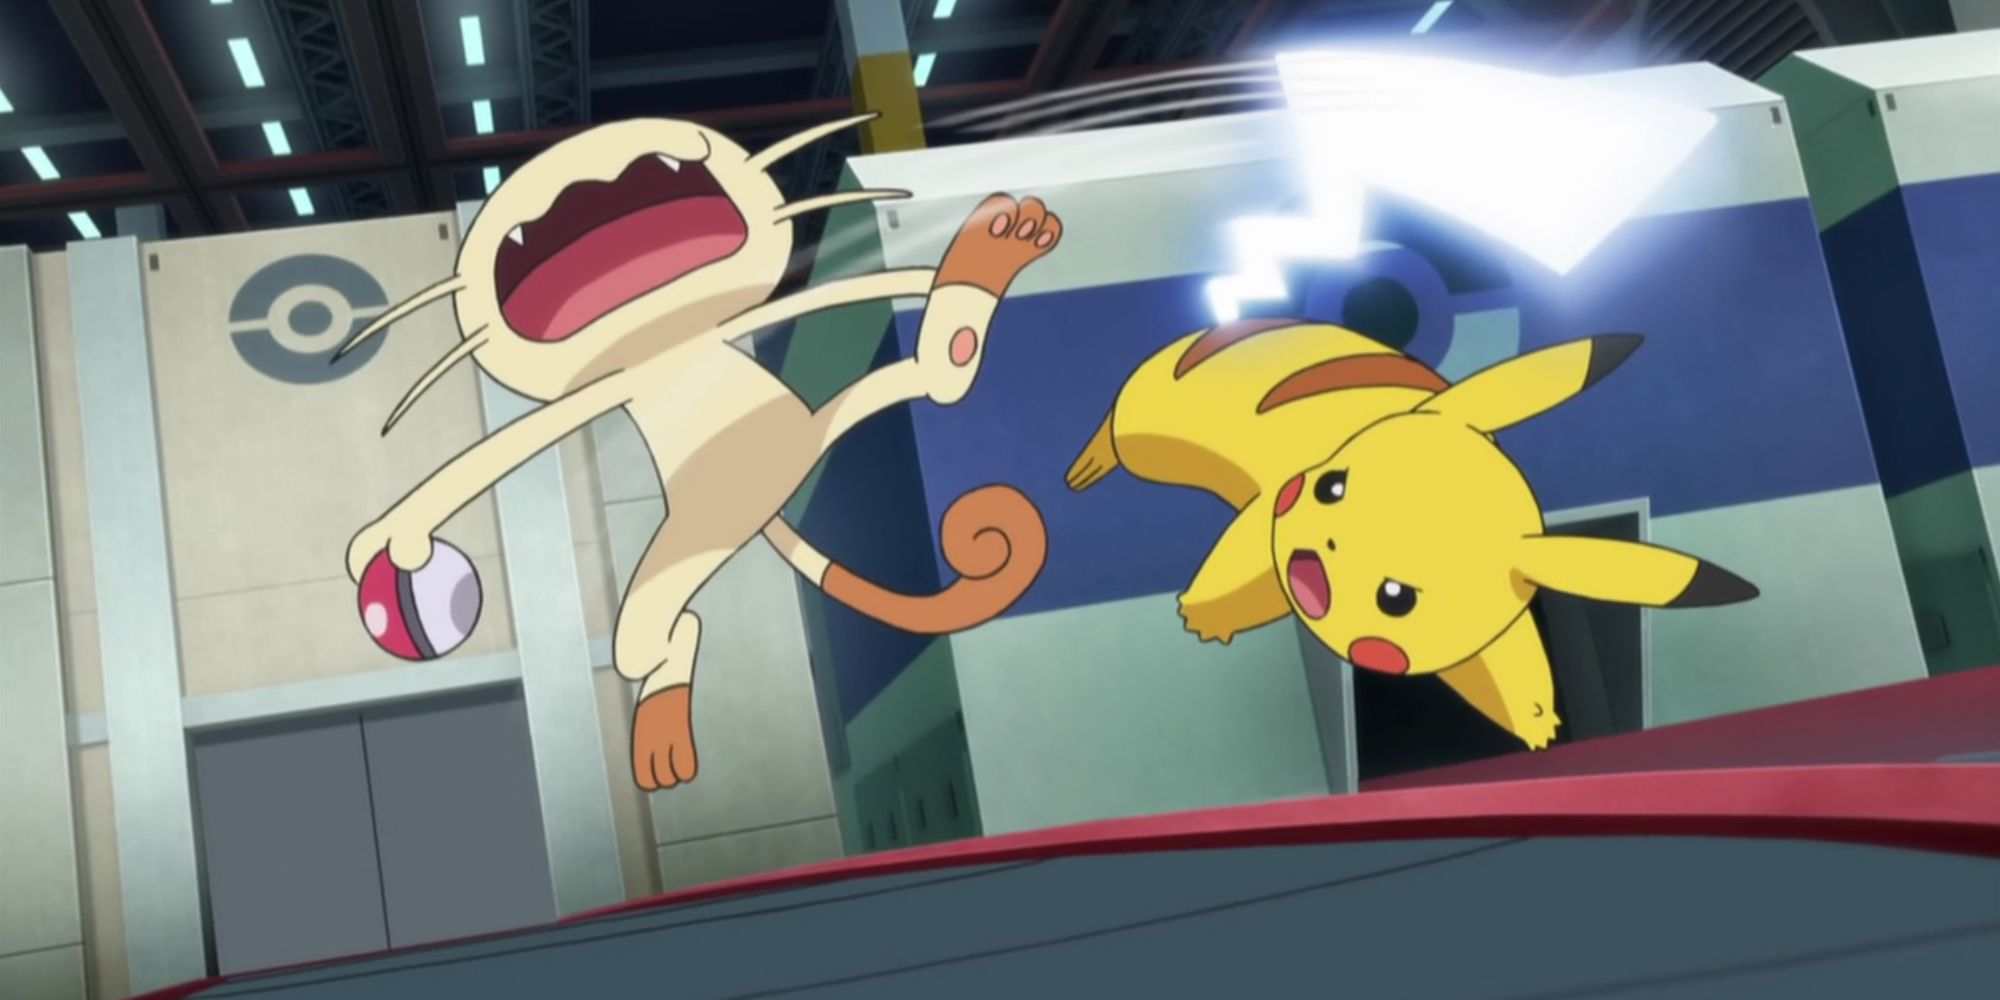 pikachu tail whipping meowth in pokemon